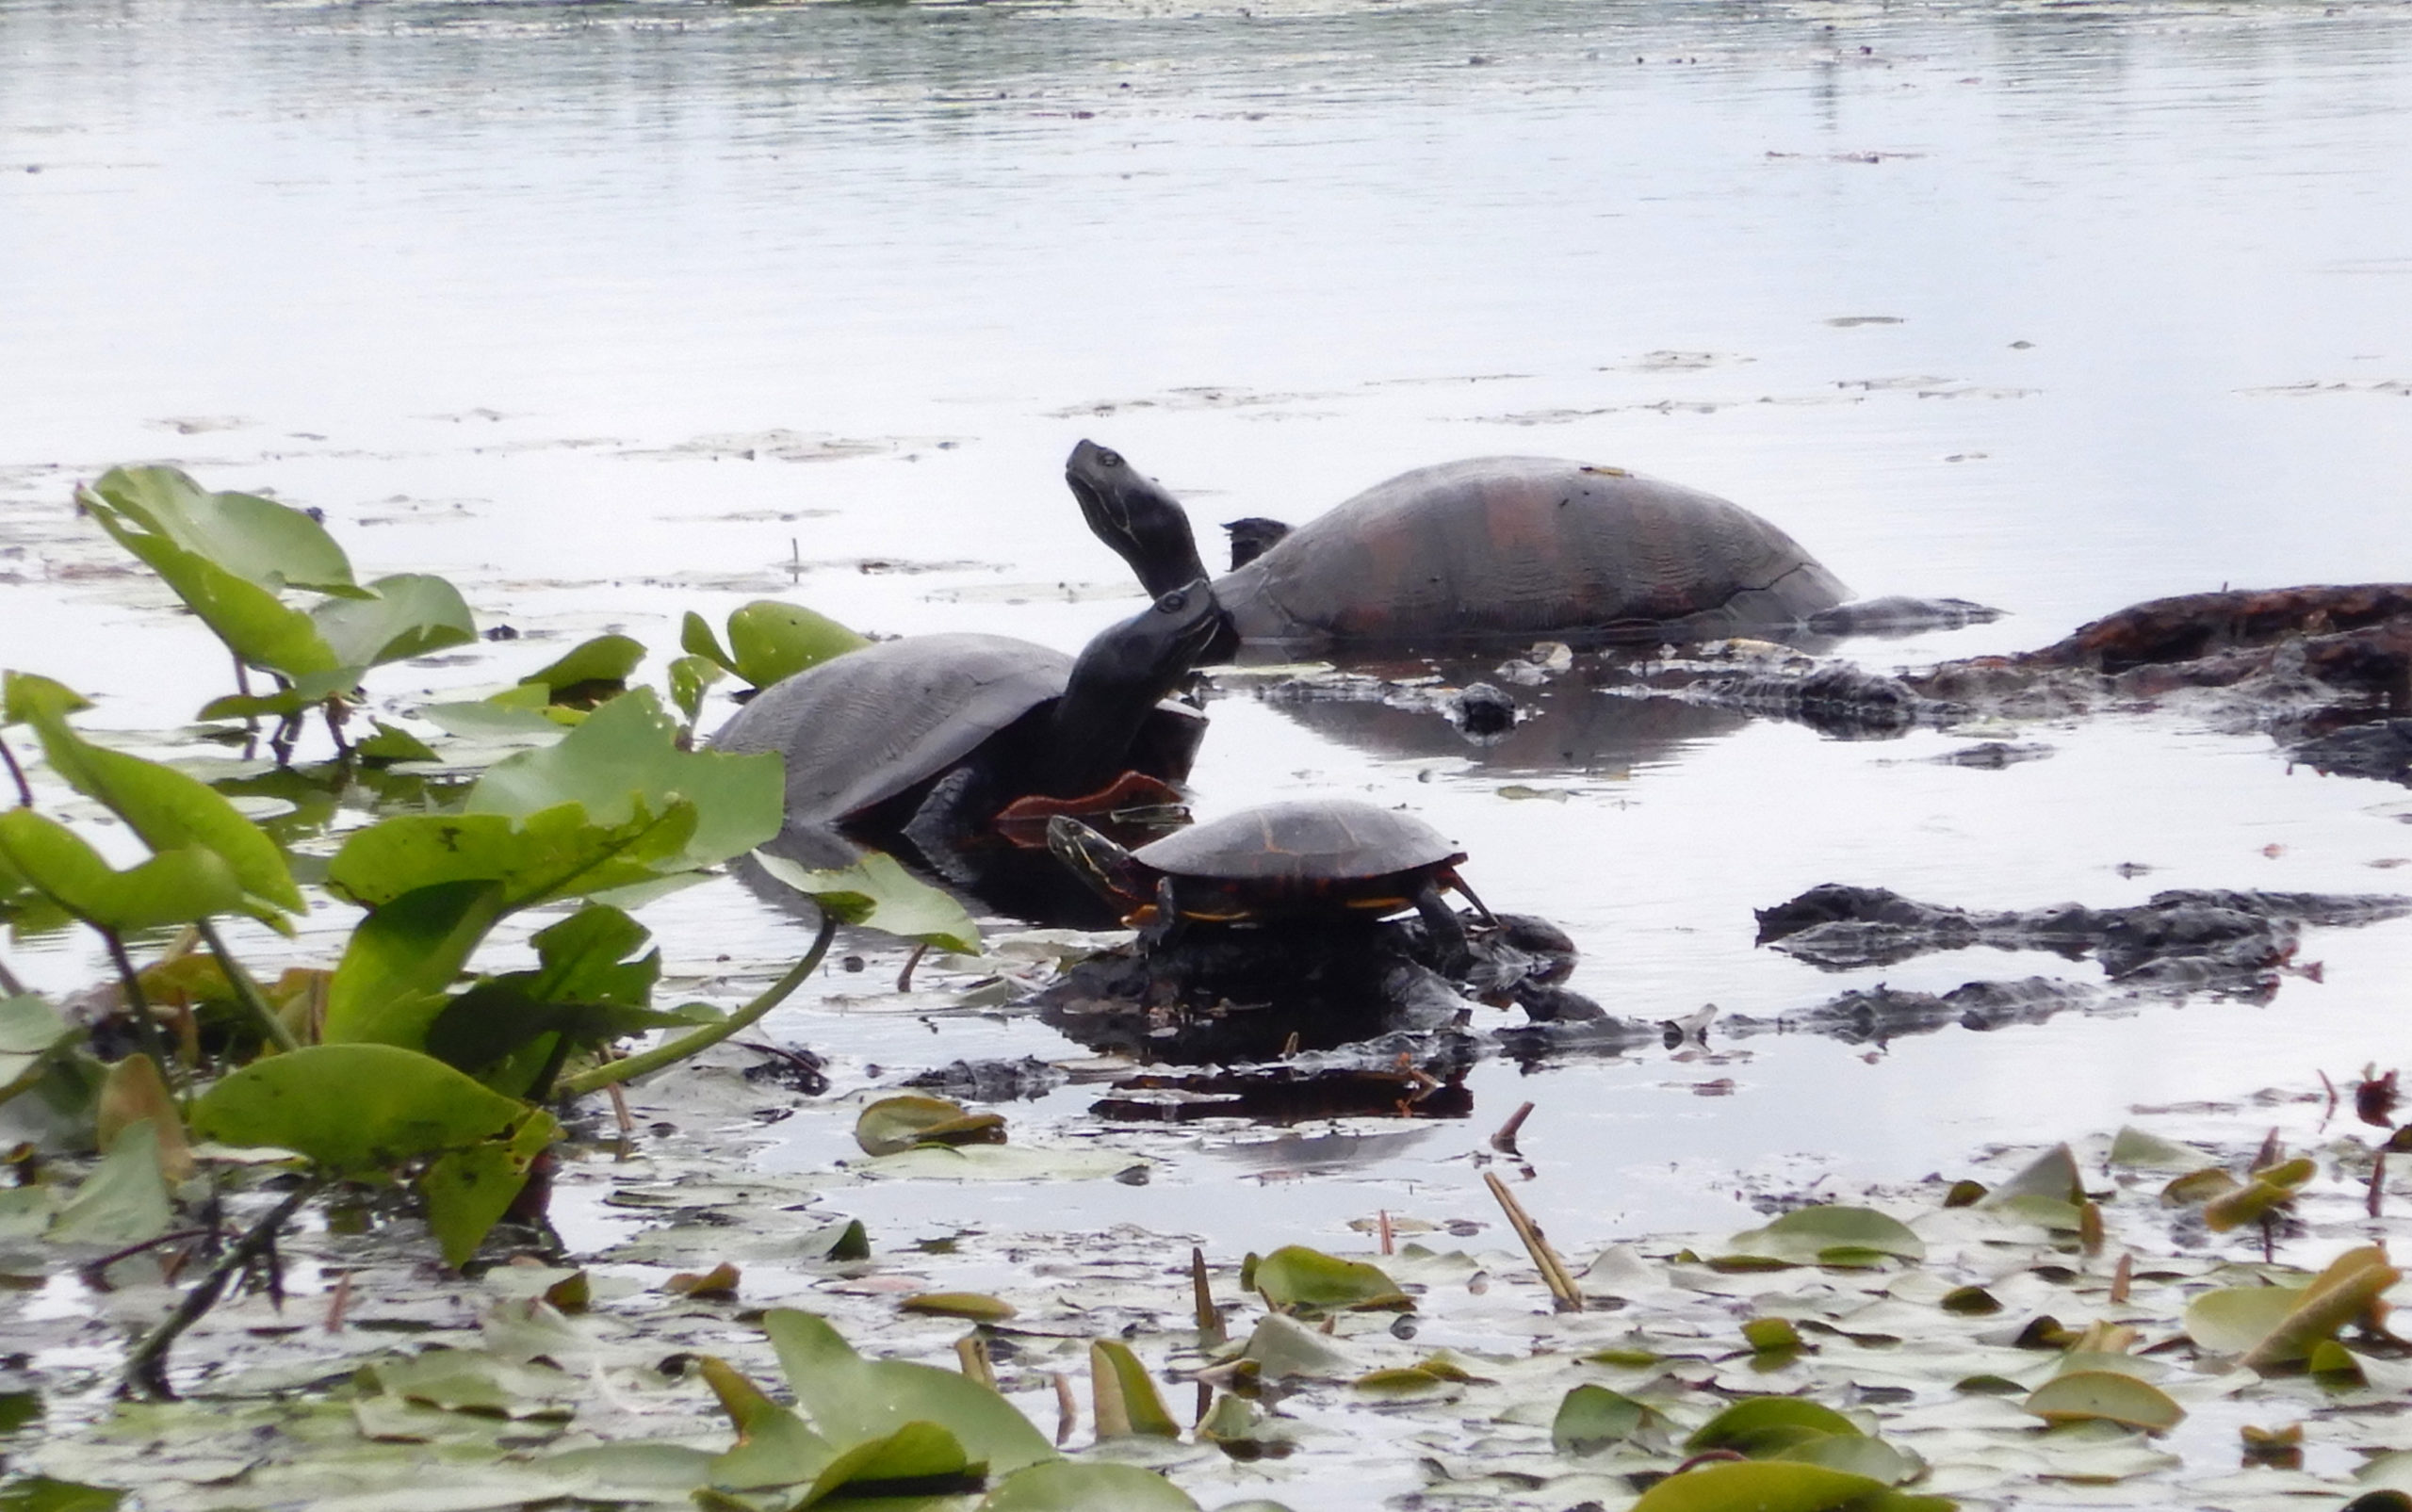 Red-bellied Cooter & Painted Turtles